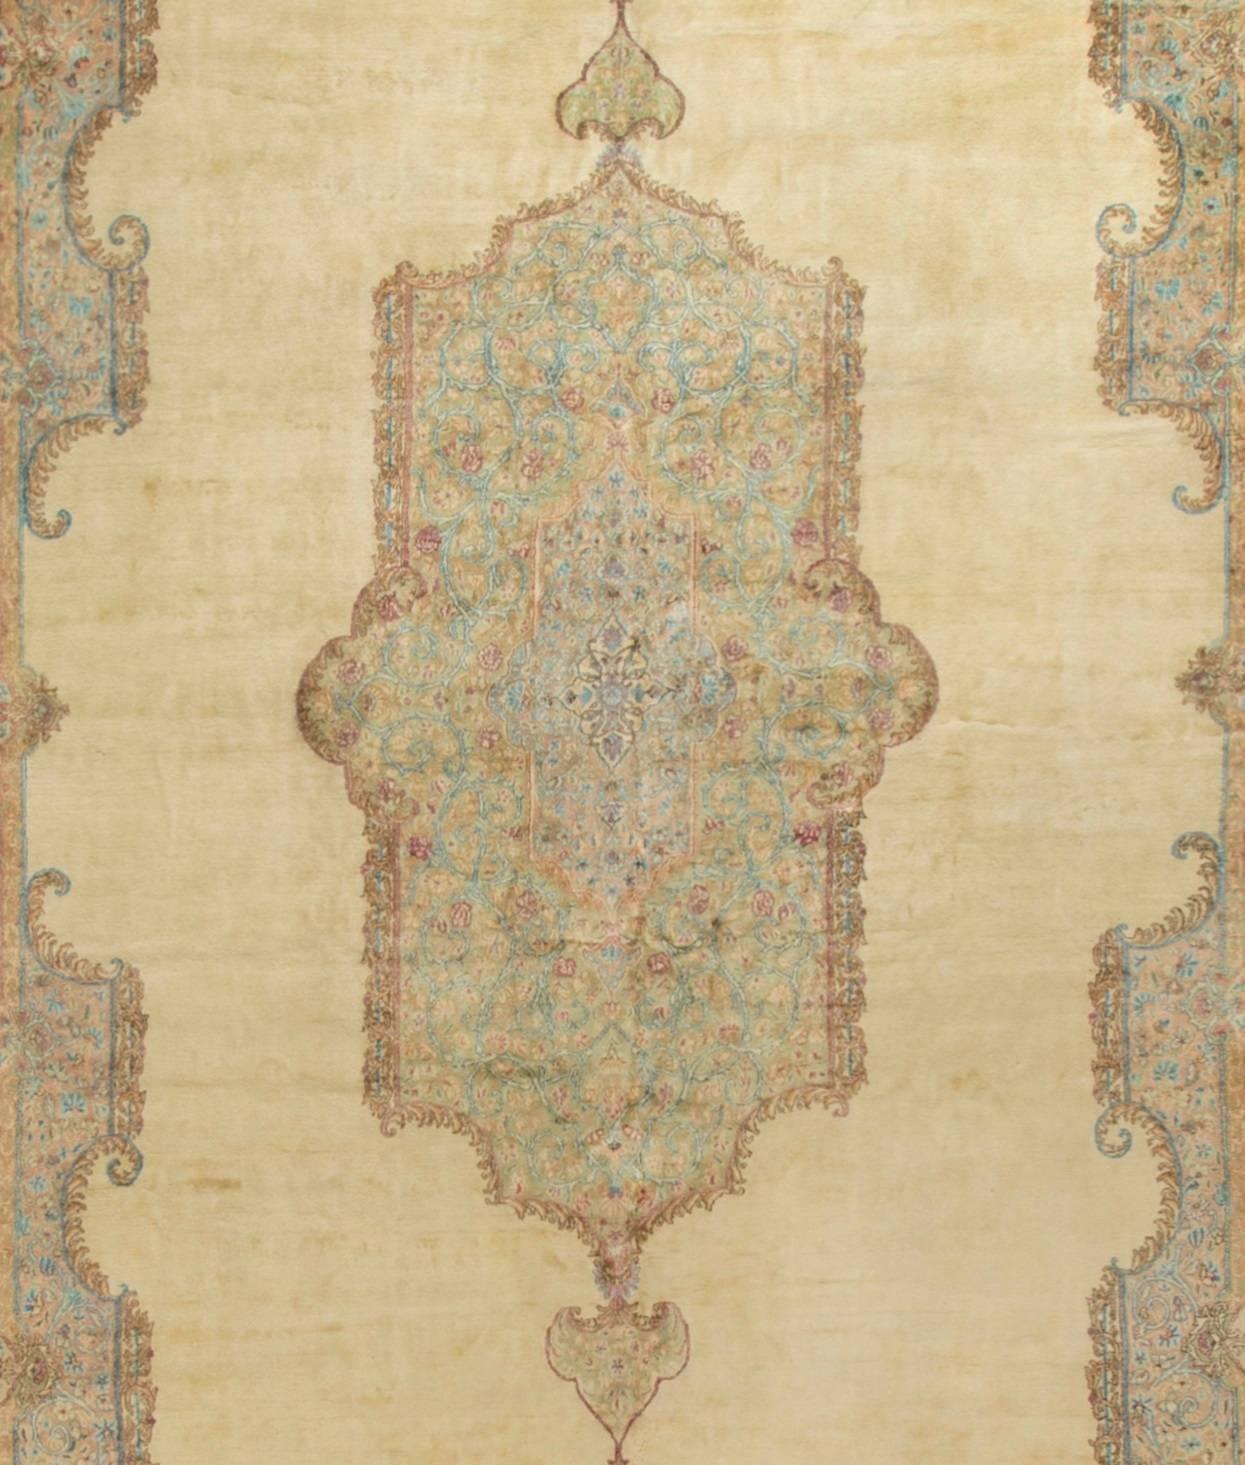 Oversize Persian Kirman circa 1940 rug carpet. The soft cream field surrounding a beautifully detailed central medallion in soft blues all complimented by a wonderful curving border. Woven in the Persian town of Kirman, situated in the south of the